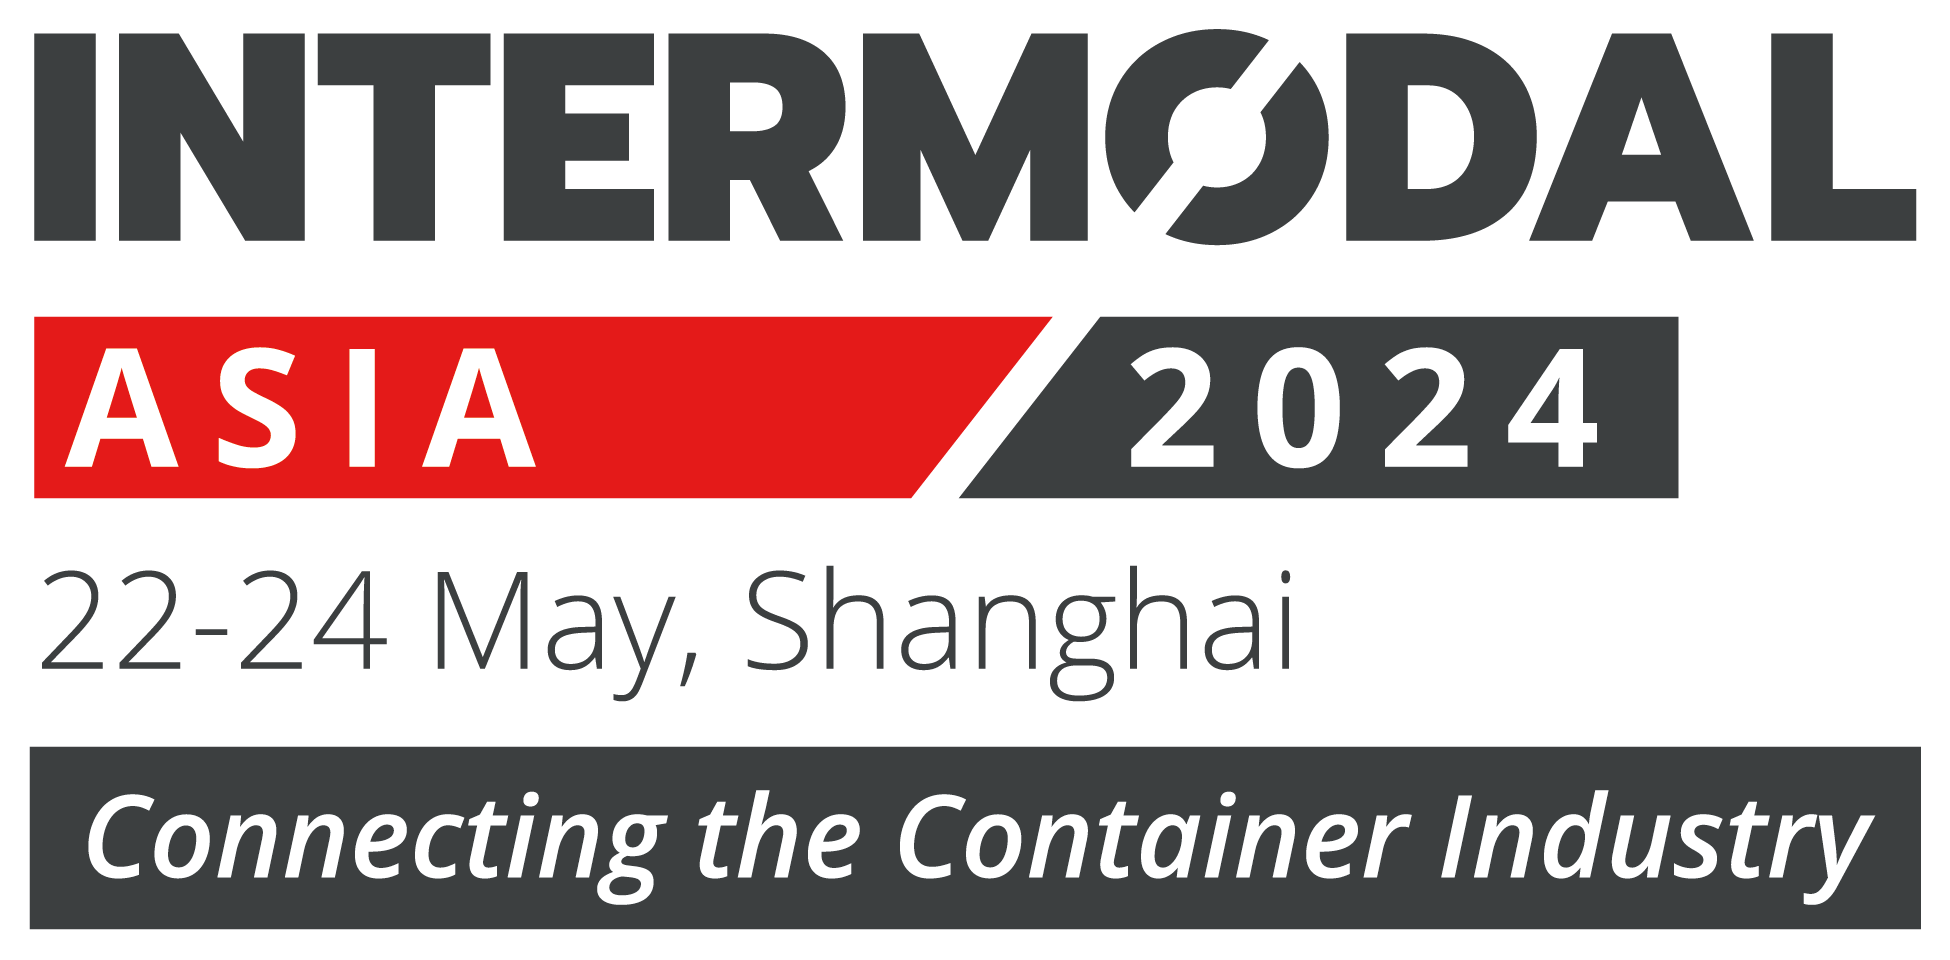 Intermodal_Asia_2024_logo_with_dates_and_strapline_RGB.png